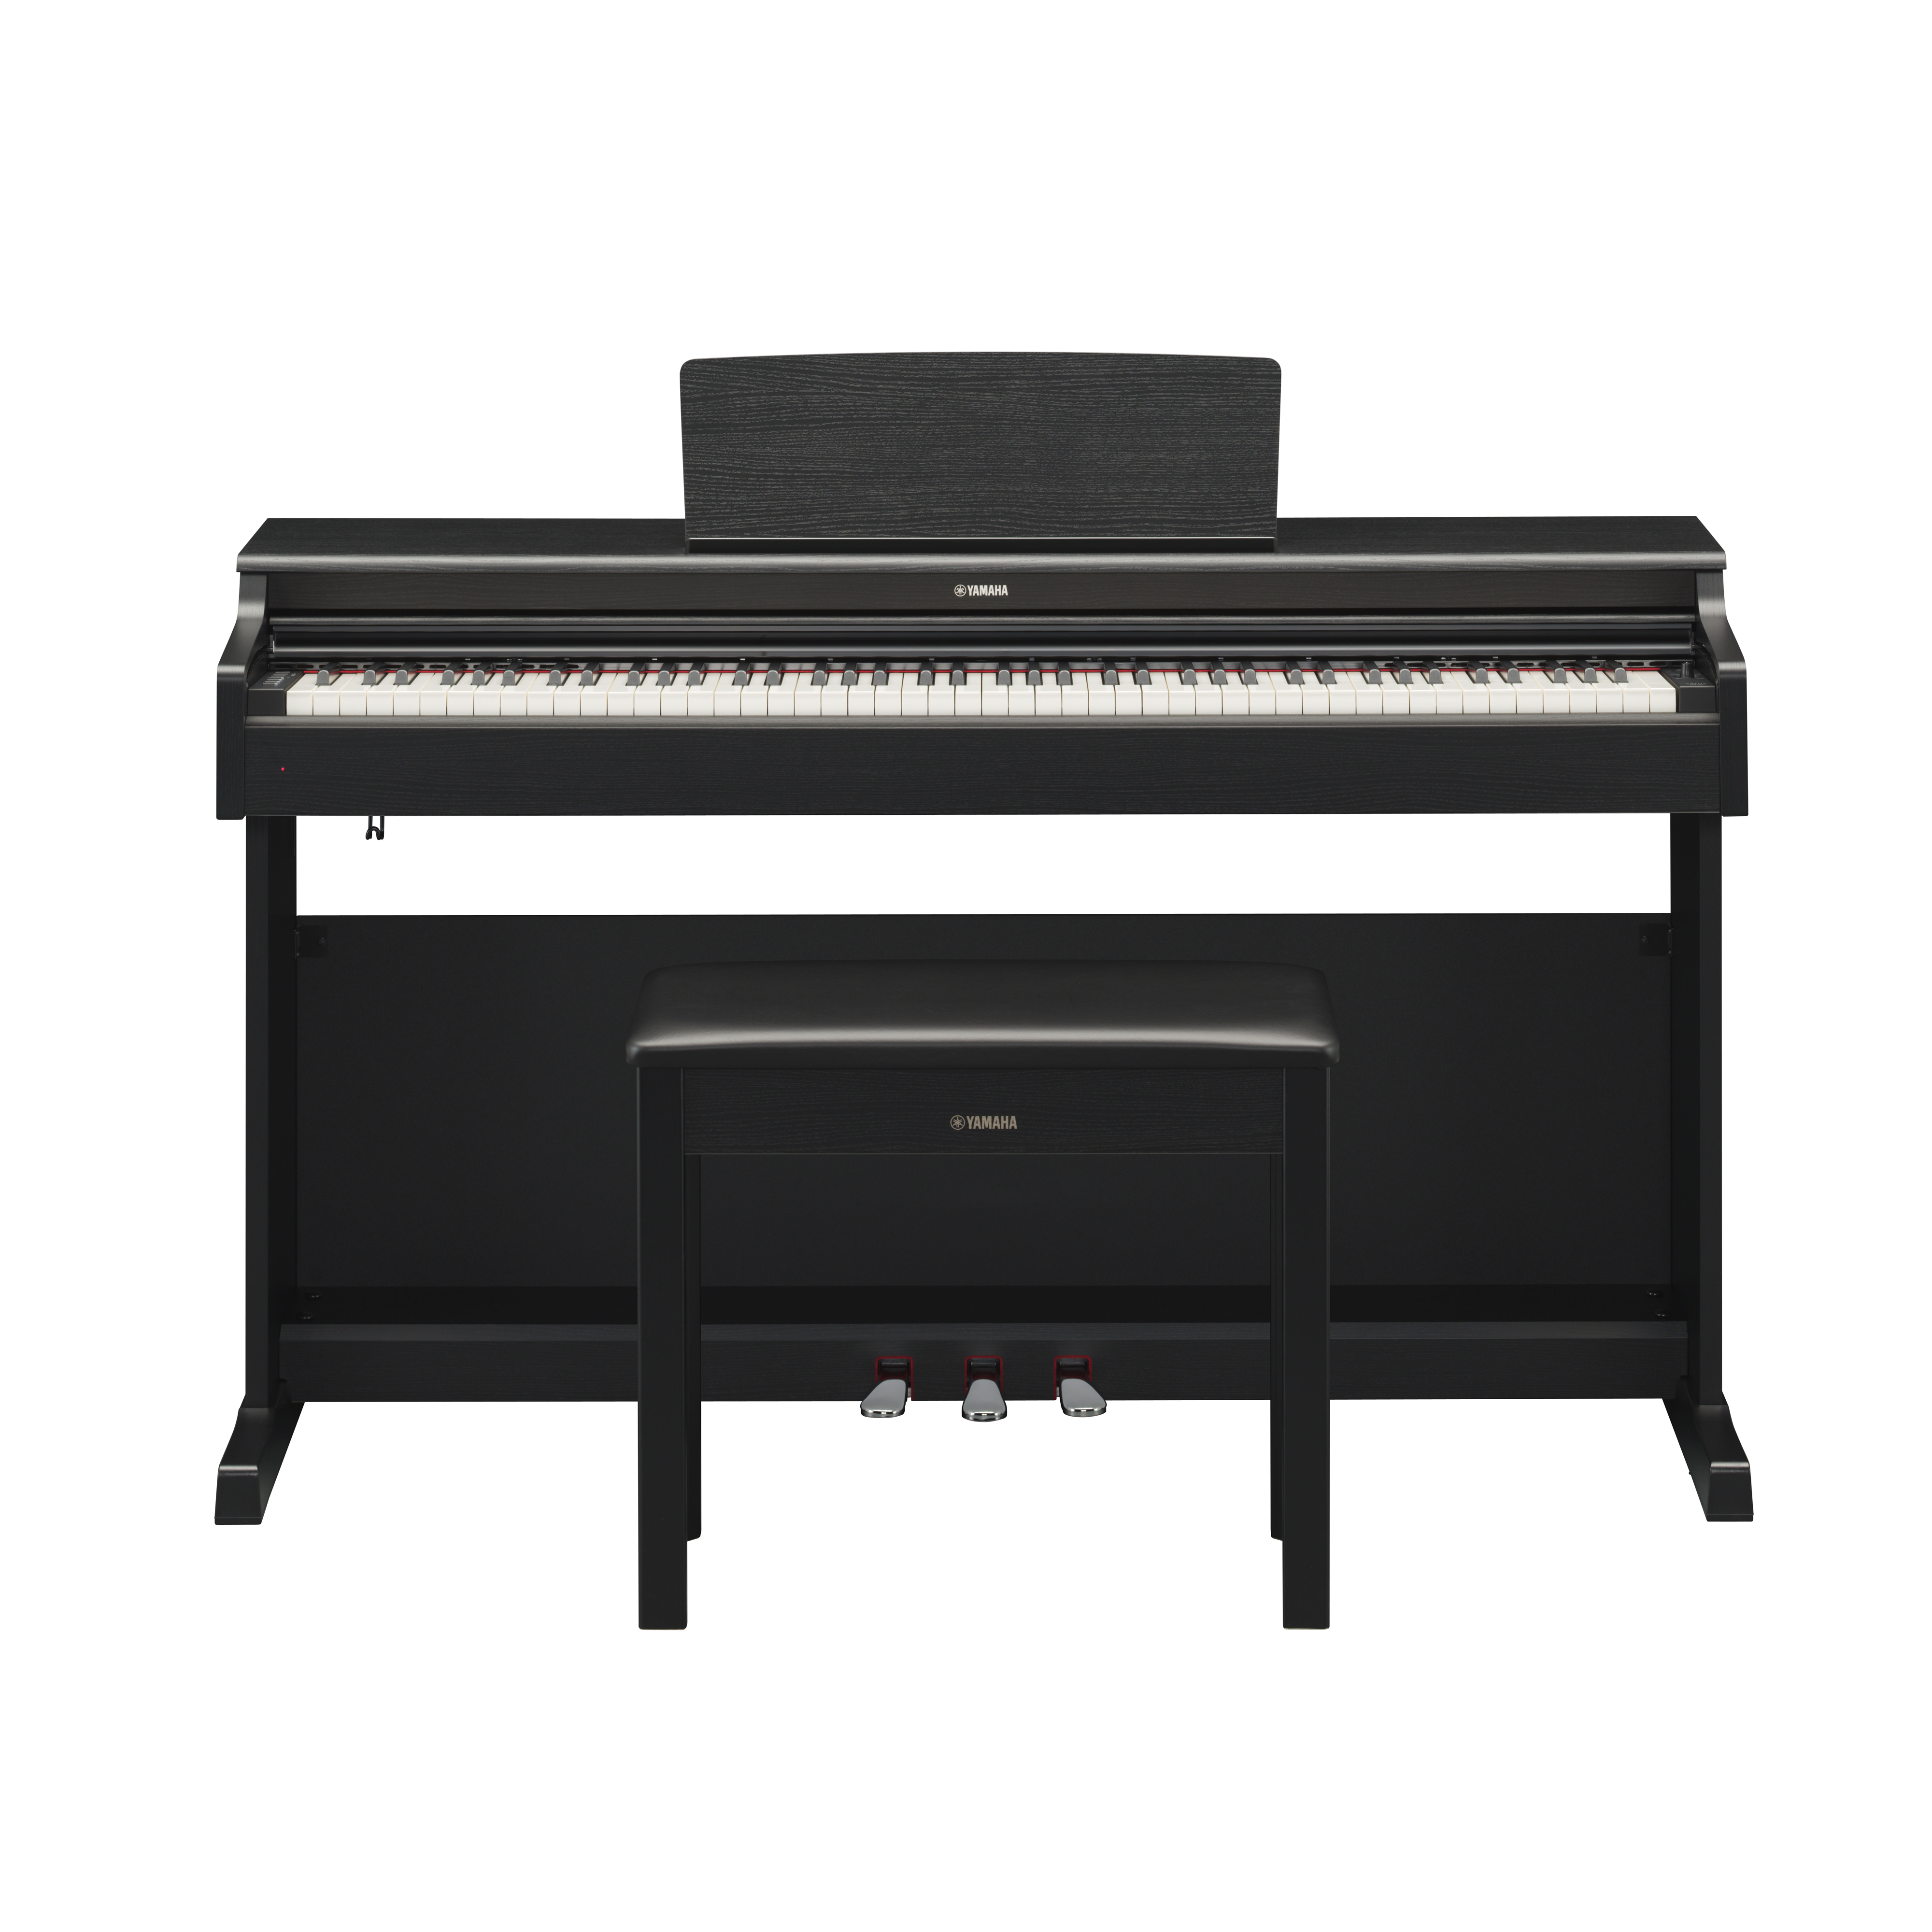 YDP-164 - Specs - ARIUS - Pianos - Musical Instruments - Products